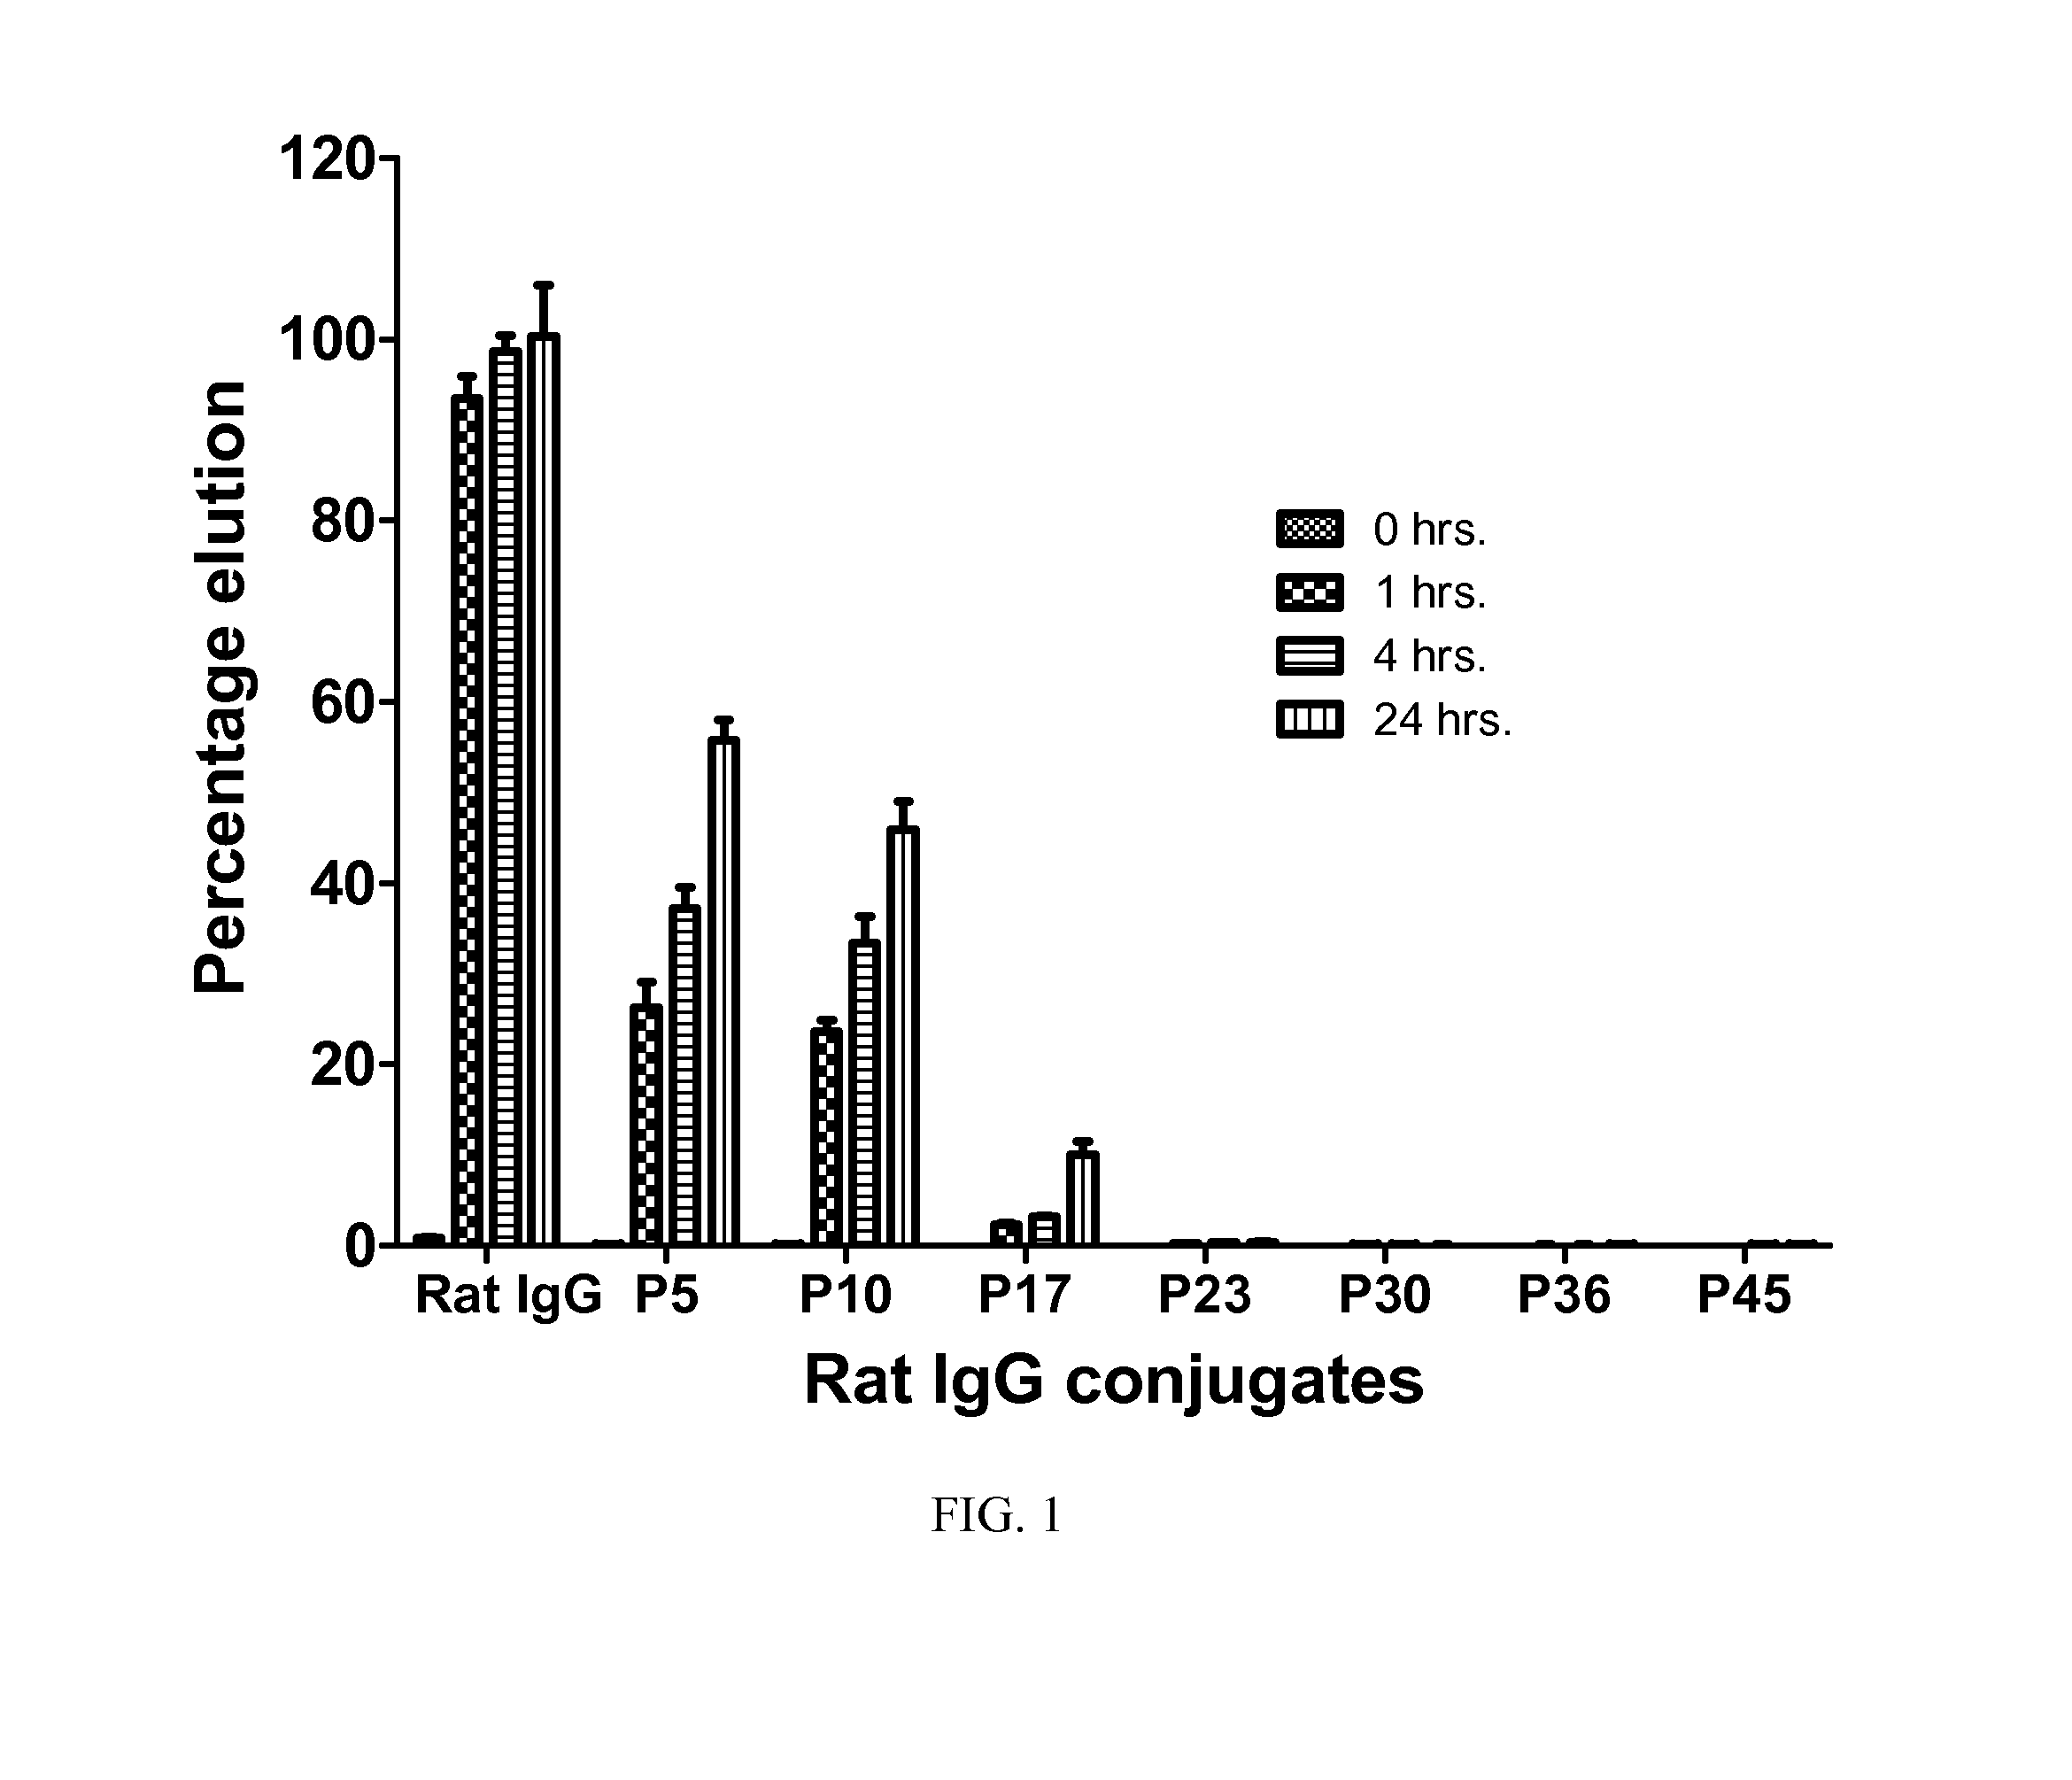 Immunogenic compositions and reagents for preparing